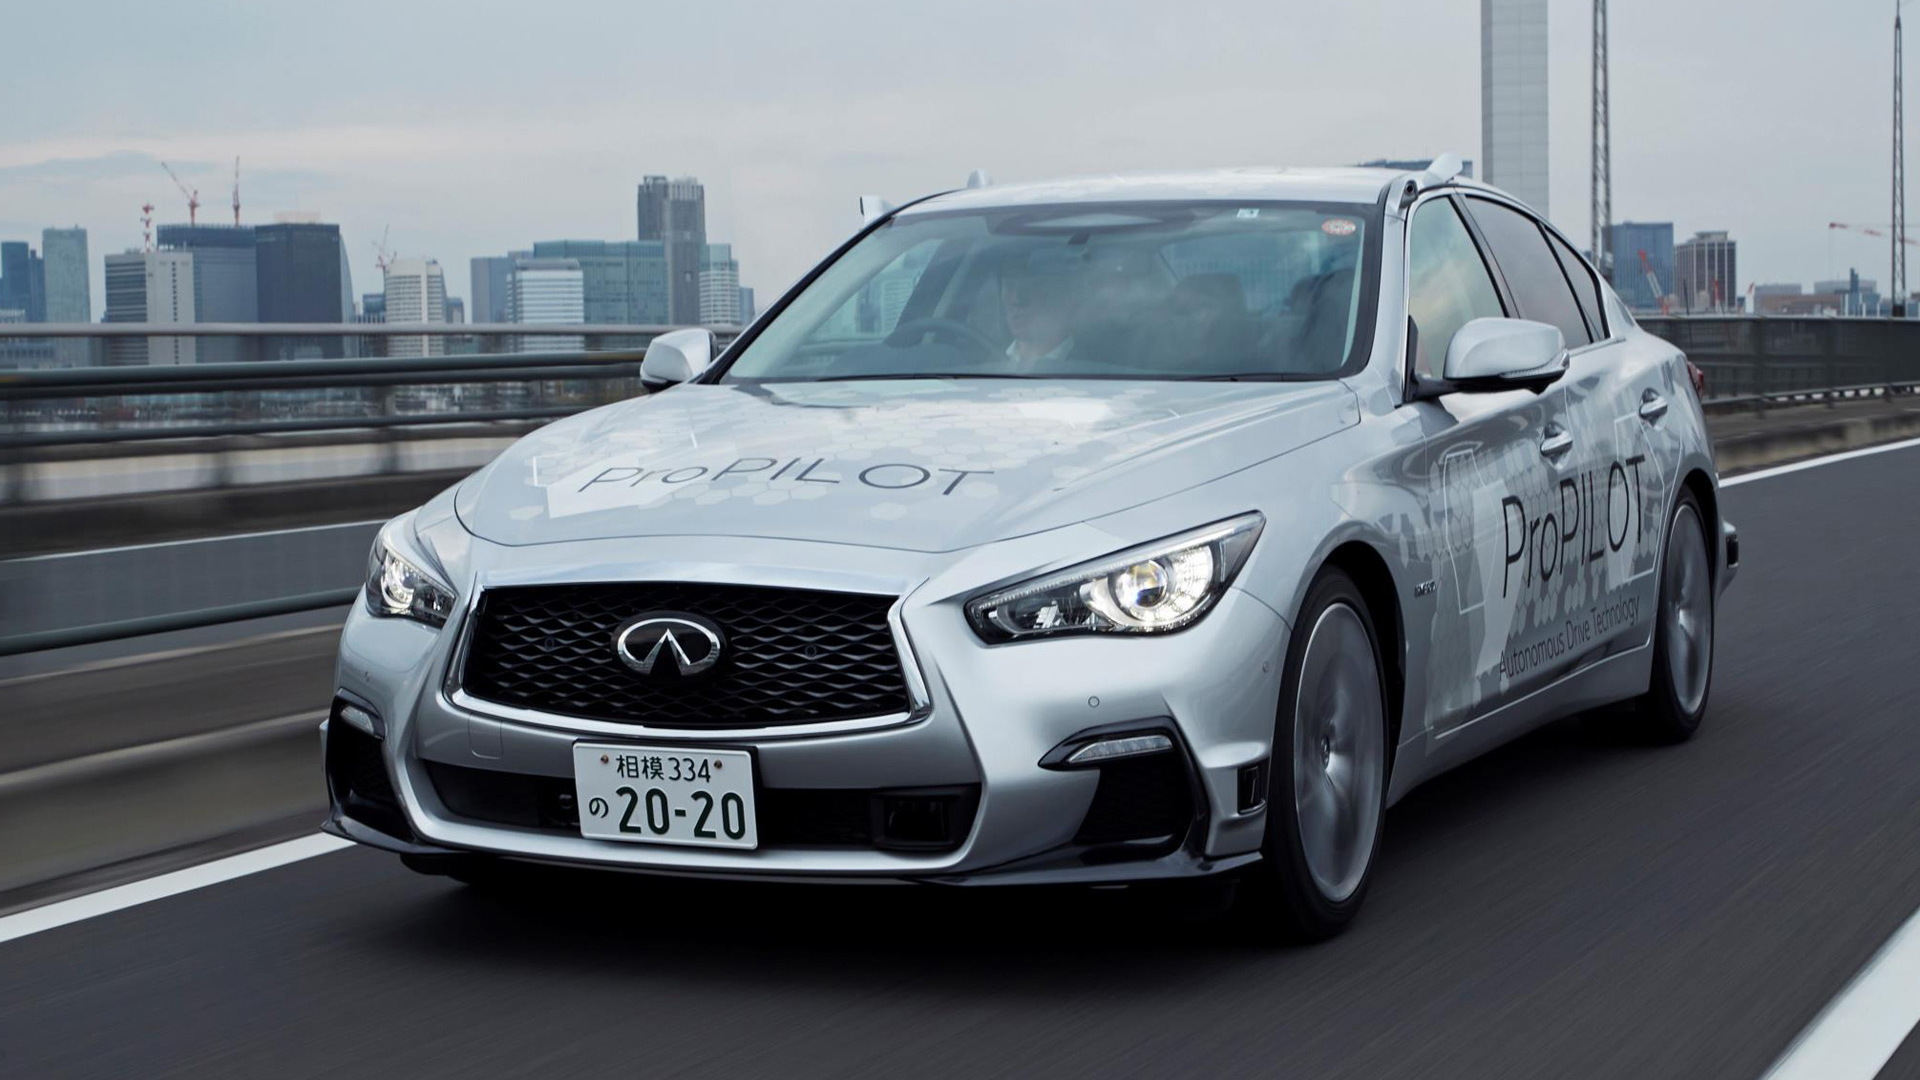 Prototype for Nissan and Infiniti’s ProPilot self-driving system